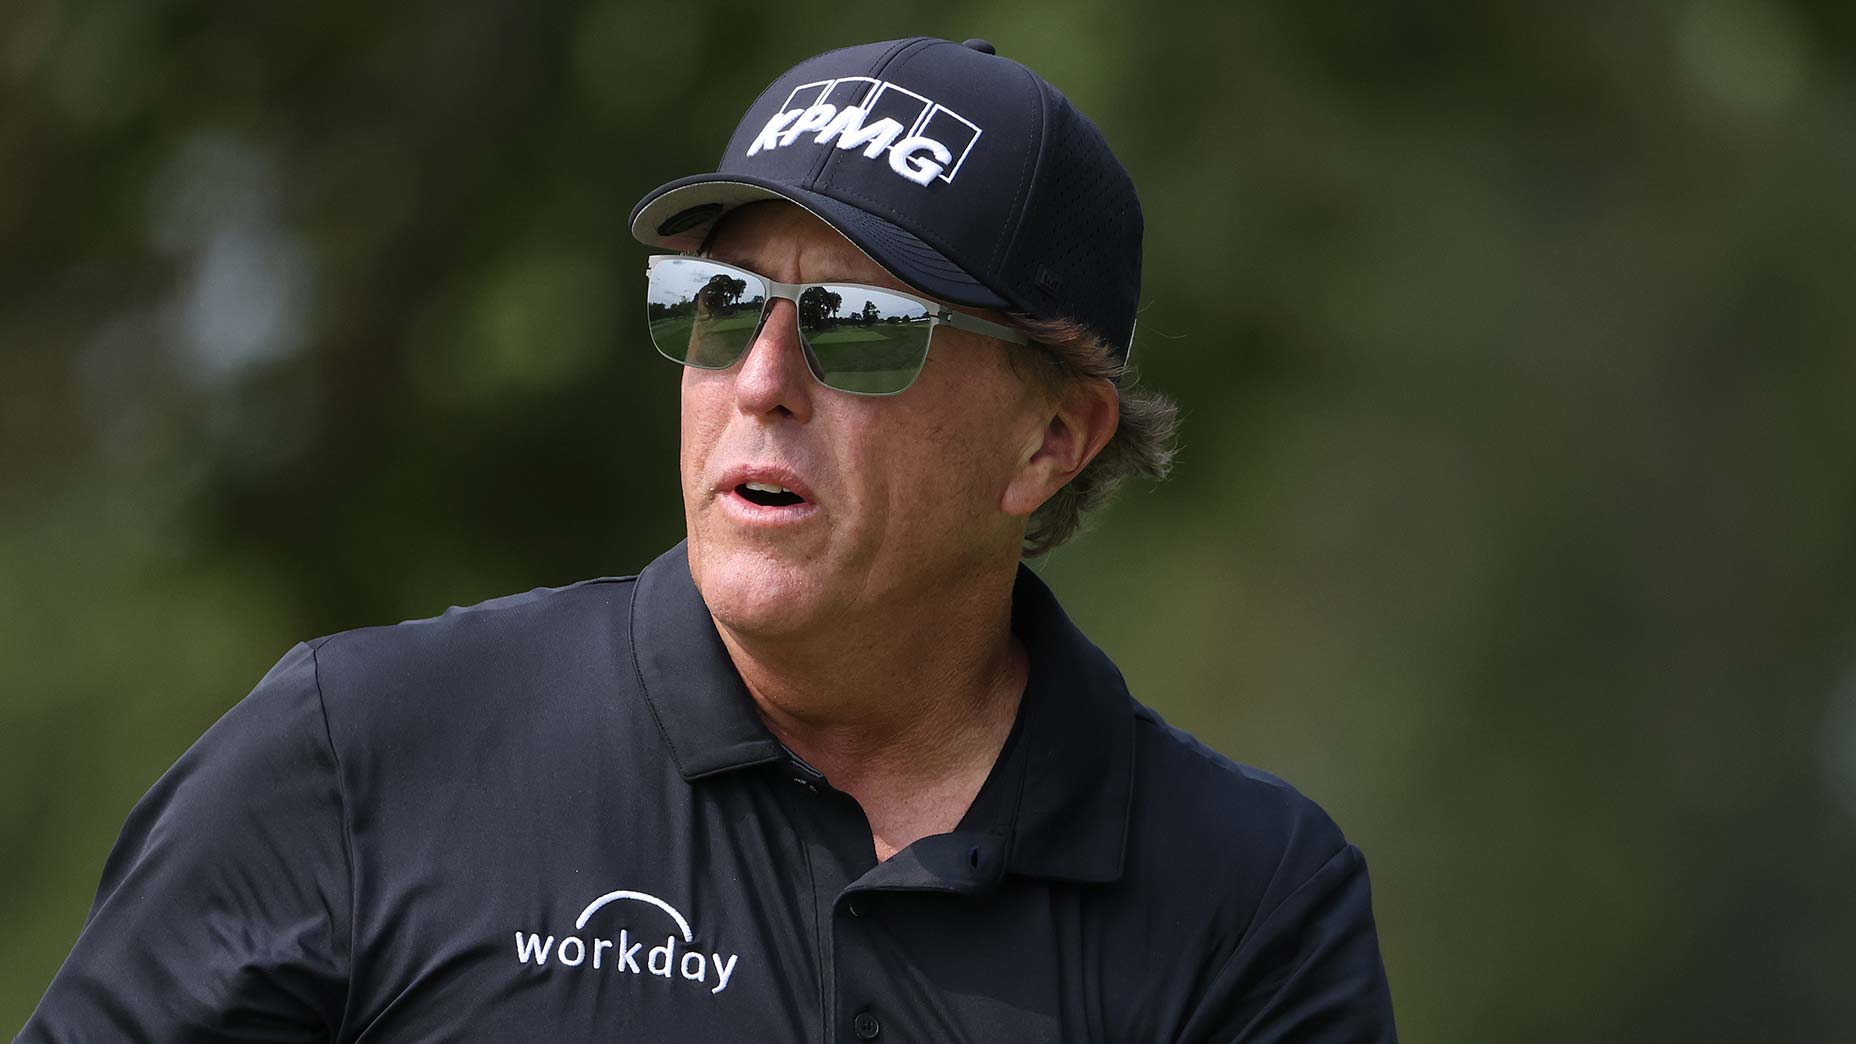 US Open 2020 Updates: Follow Phil Mickelson's first round at Winged Foot